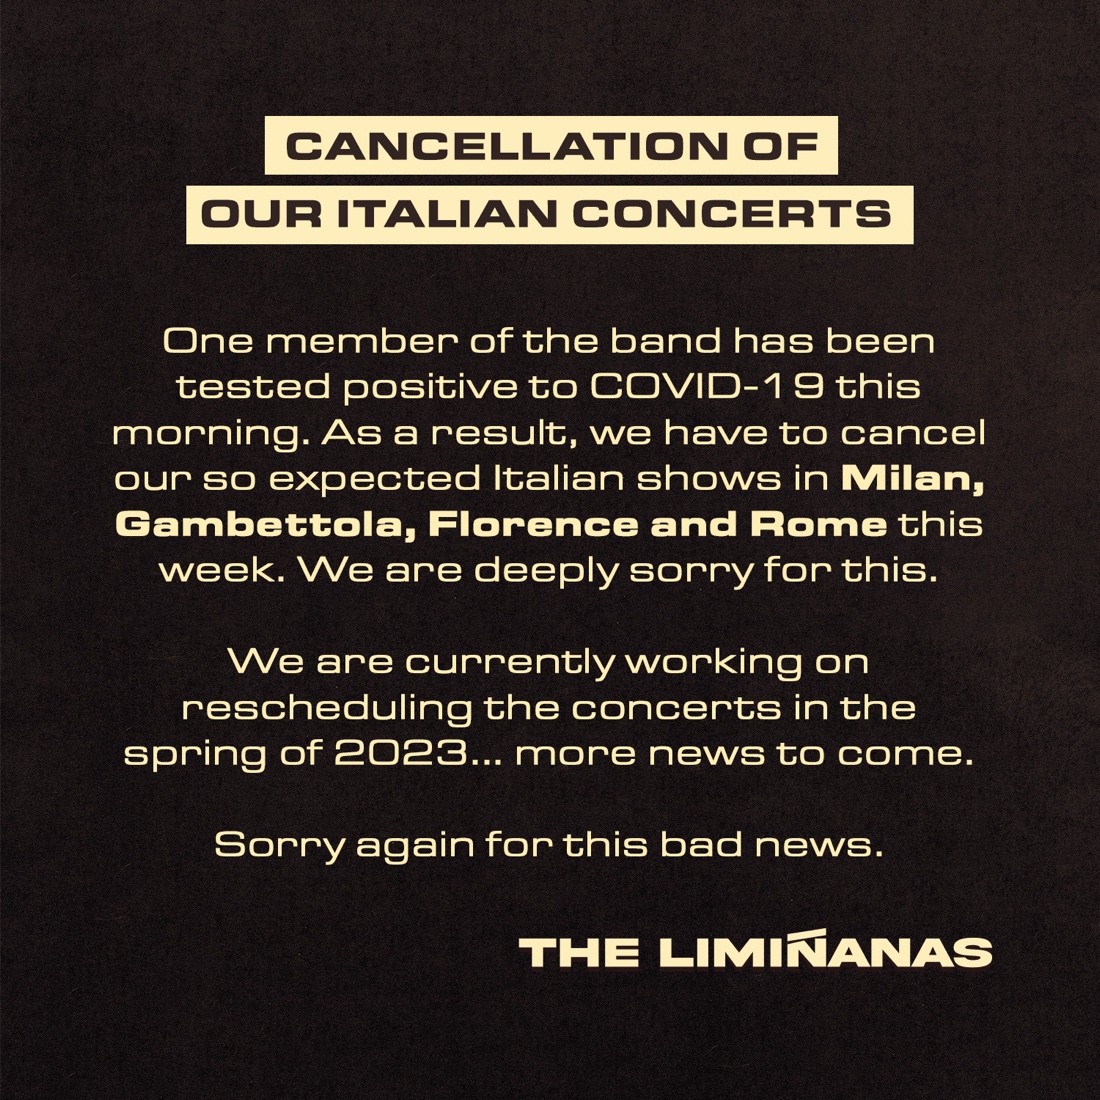 We are deeply sorry to cancel our so expecting Italian shows this week as one of the band member have been tested positive this morning. We are currently working on rescheduling the shows in spring 2023...more news to come soon. Sorry again for this bad news.